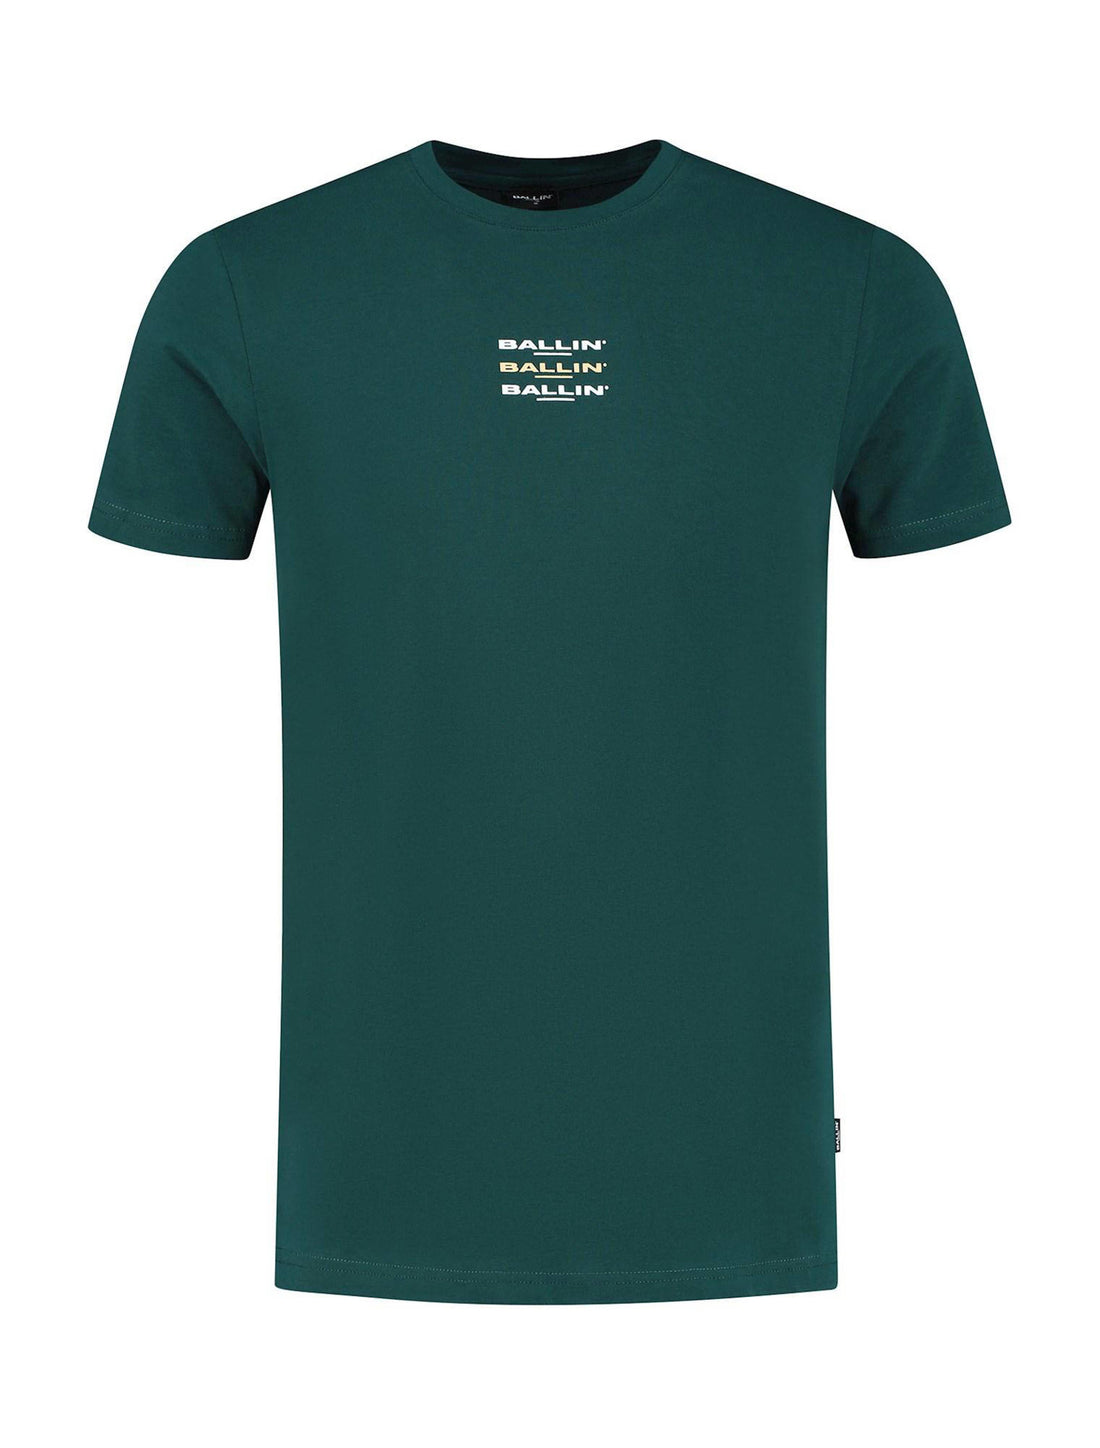 Tshirt with front and back print - green